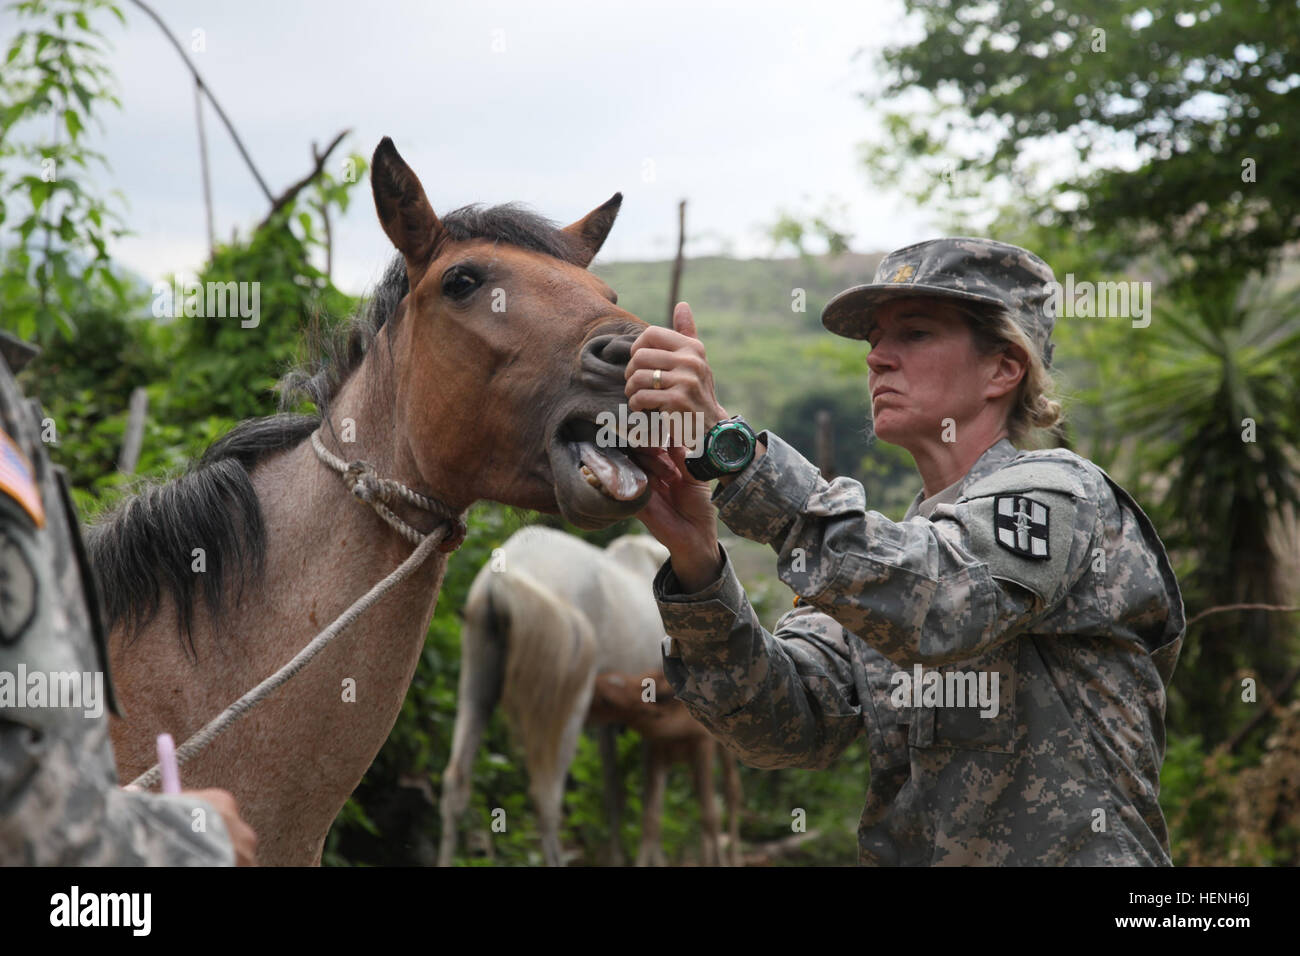 U.S. Army Maj. Victoria Smith, of the 149th Medical Detachment Veterinary Services, vaccinates a horse for a Veterinary Readiness Training Exercise during Beyond the Horizon, San Jose, Guatemala, May 25, 2014. Beyond the Horizon is an annual exercise that embraces the partnership between the United States and Guatemala, to provide focused humanitarian assistance through various medical, dental, and civic action programs. (U.S. Army photo by Pfc. Christopher Martin/Released) Beyond the Horizon 2014, Guatemala 140525-A-GA303-006 Stock Photo